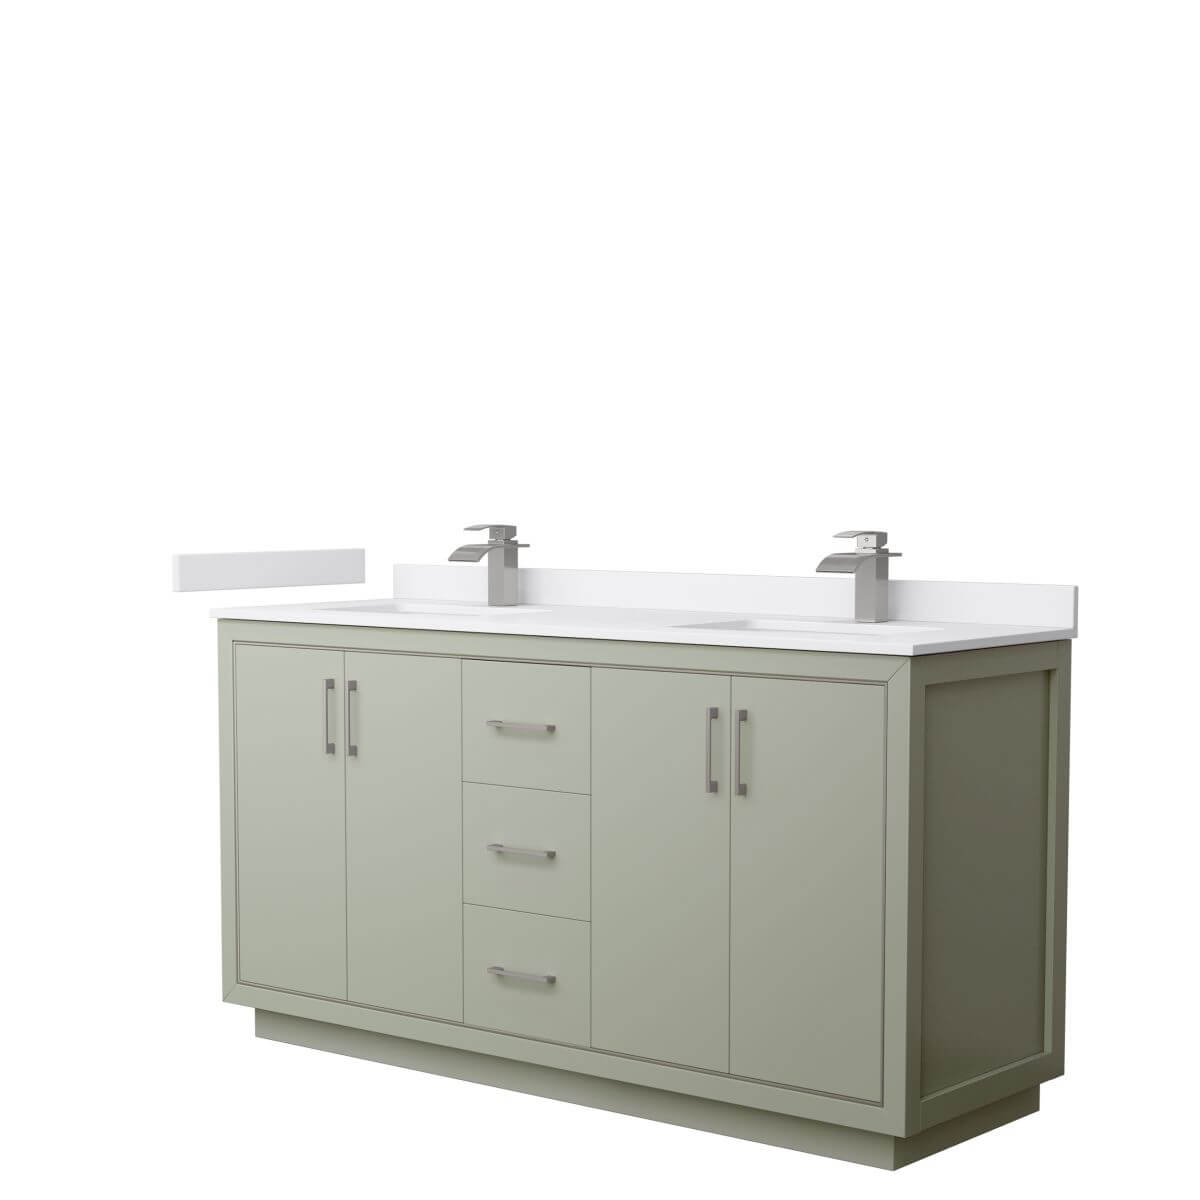 Wyndham Collection WCF111166DLGWCUNSMXX Icon 66 inch Double Bathroom Vanity in Light Green with White Cultured Marble Countertop, Undermount Square Sinks and Brushed Nickel Trim